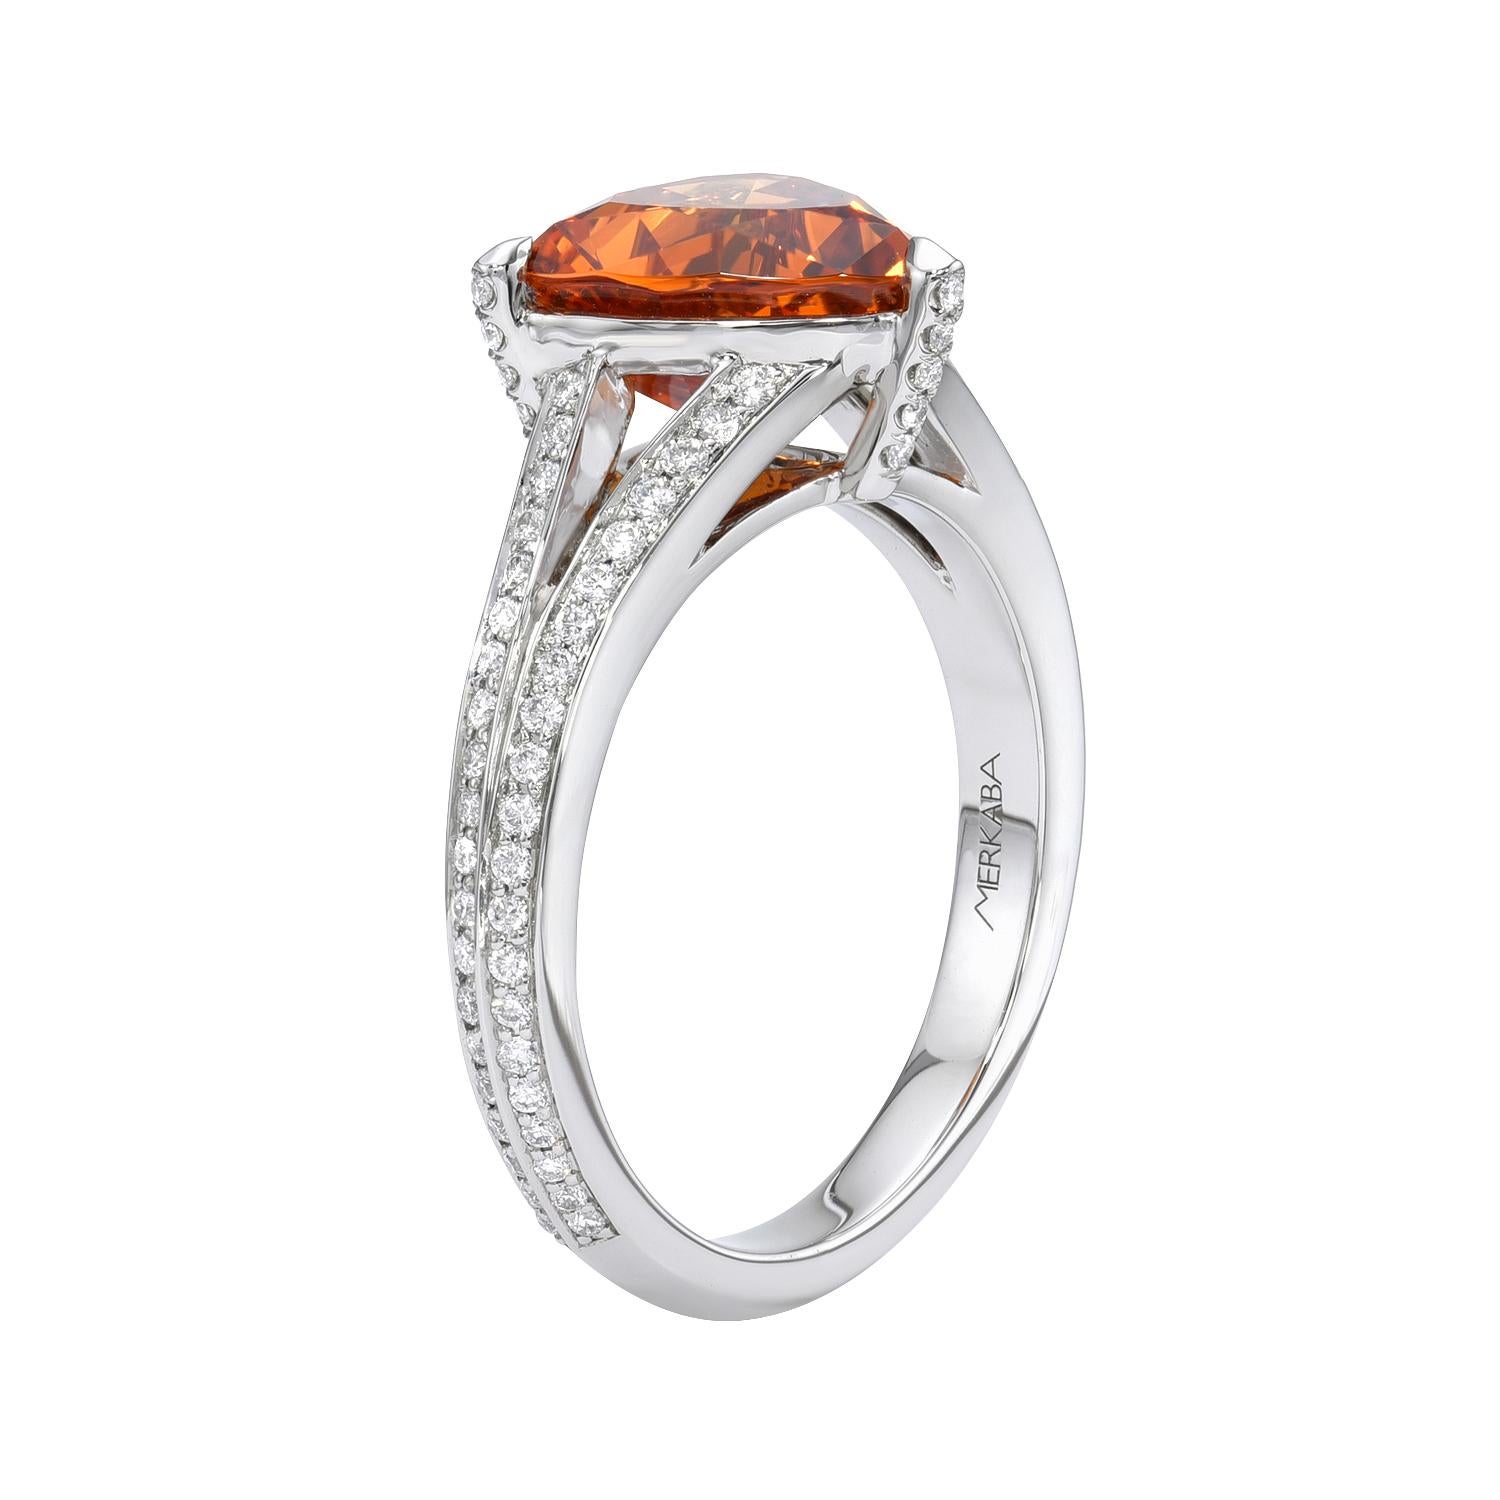 Prominent 3.76 carat Mandarin Garnet Trillion platinum ring, decorated with a total of 0.32 carat round brilliant diamonds.
Ring size 6.5. Resizing is complementary upon request.
Returns are accepted and paid by us within 7 days of delivery.

Please